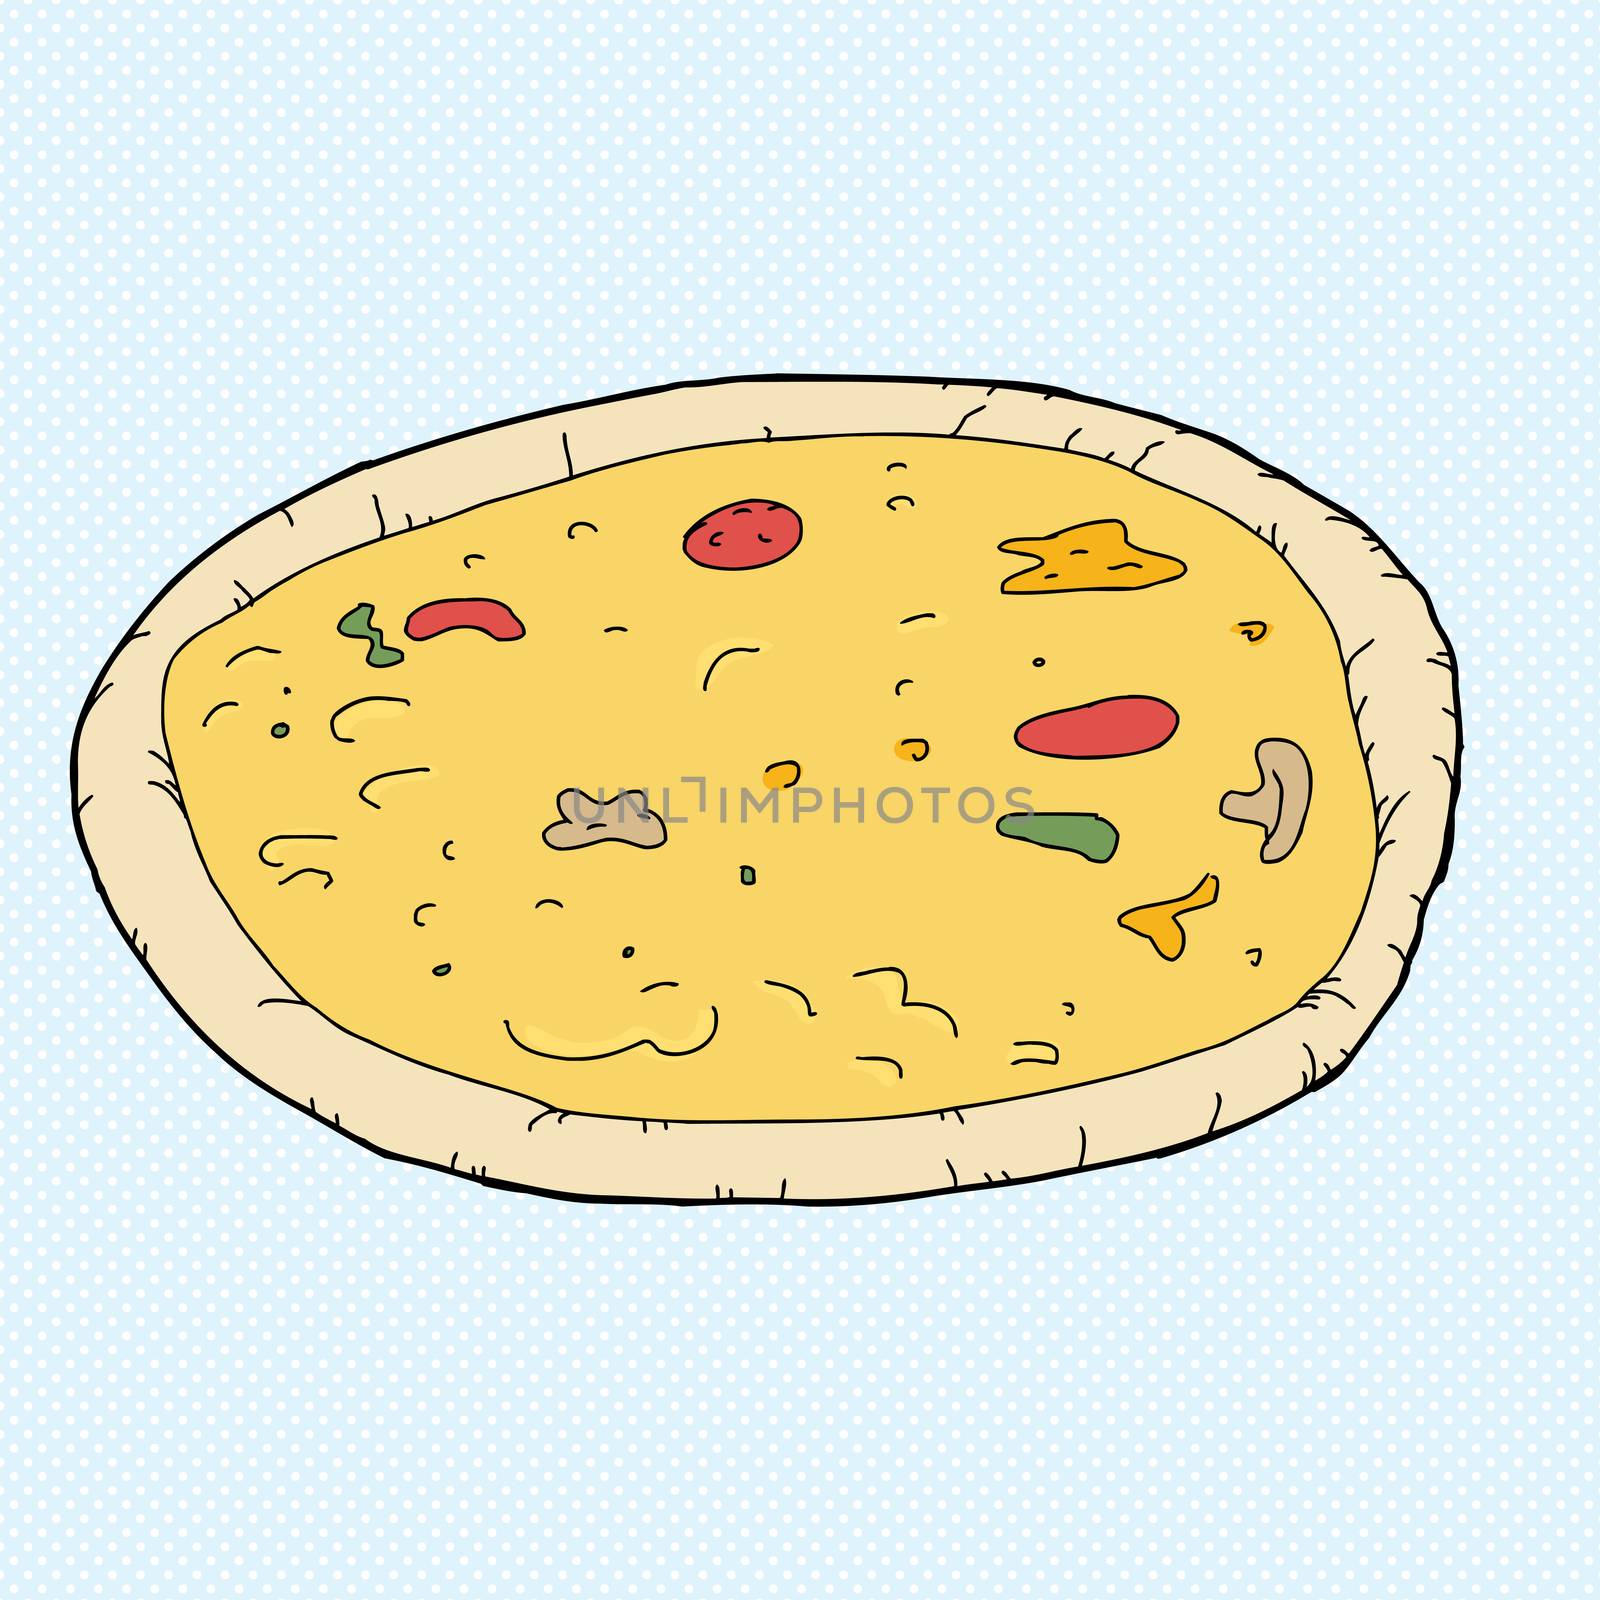 Single whole round pizza over blue background